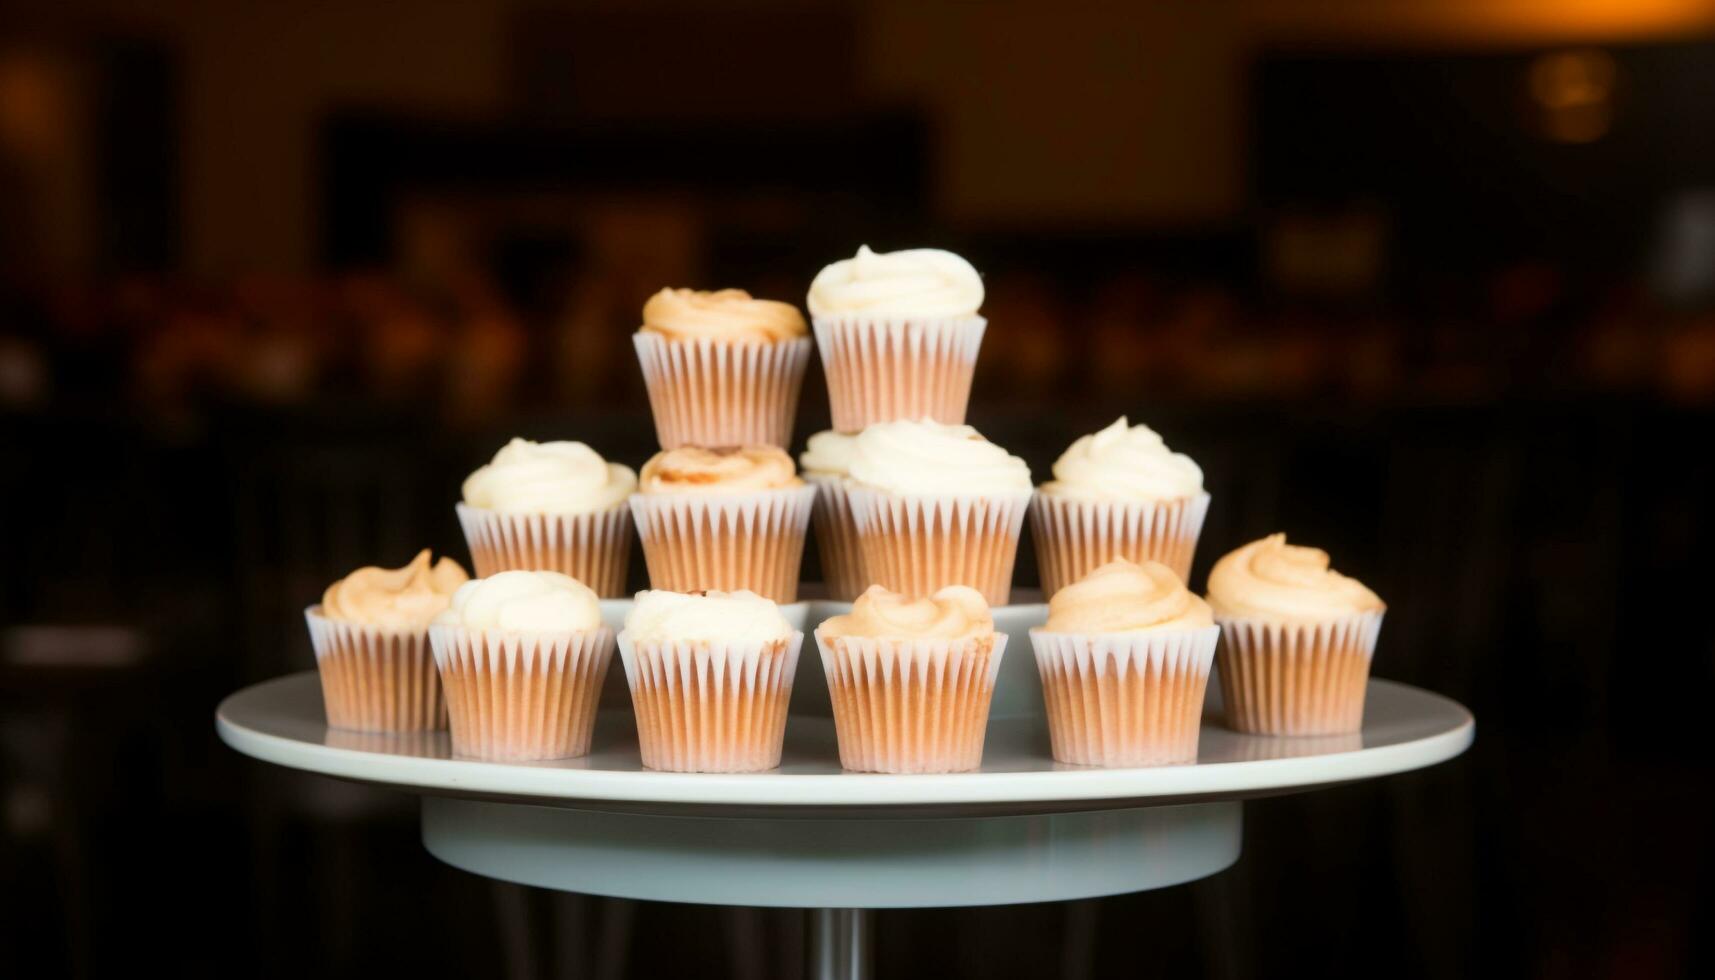 A row of indulgent gourmet cupcakes with ornate decoration generated by AI photo